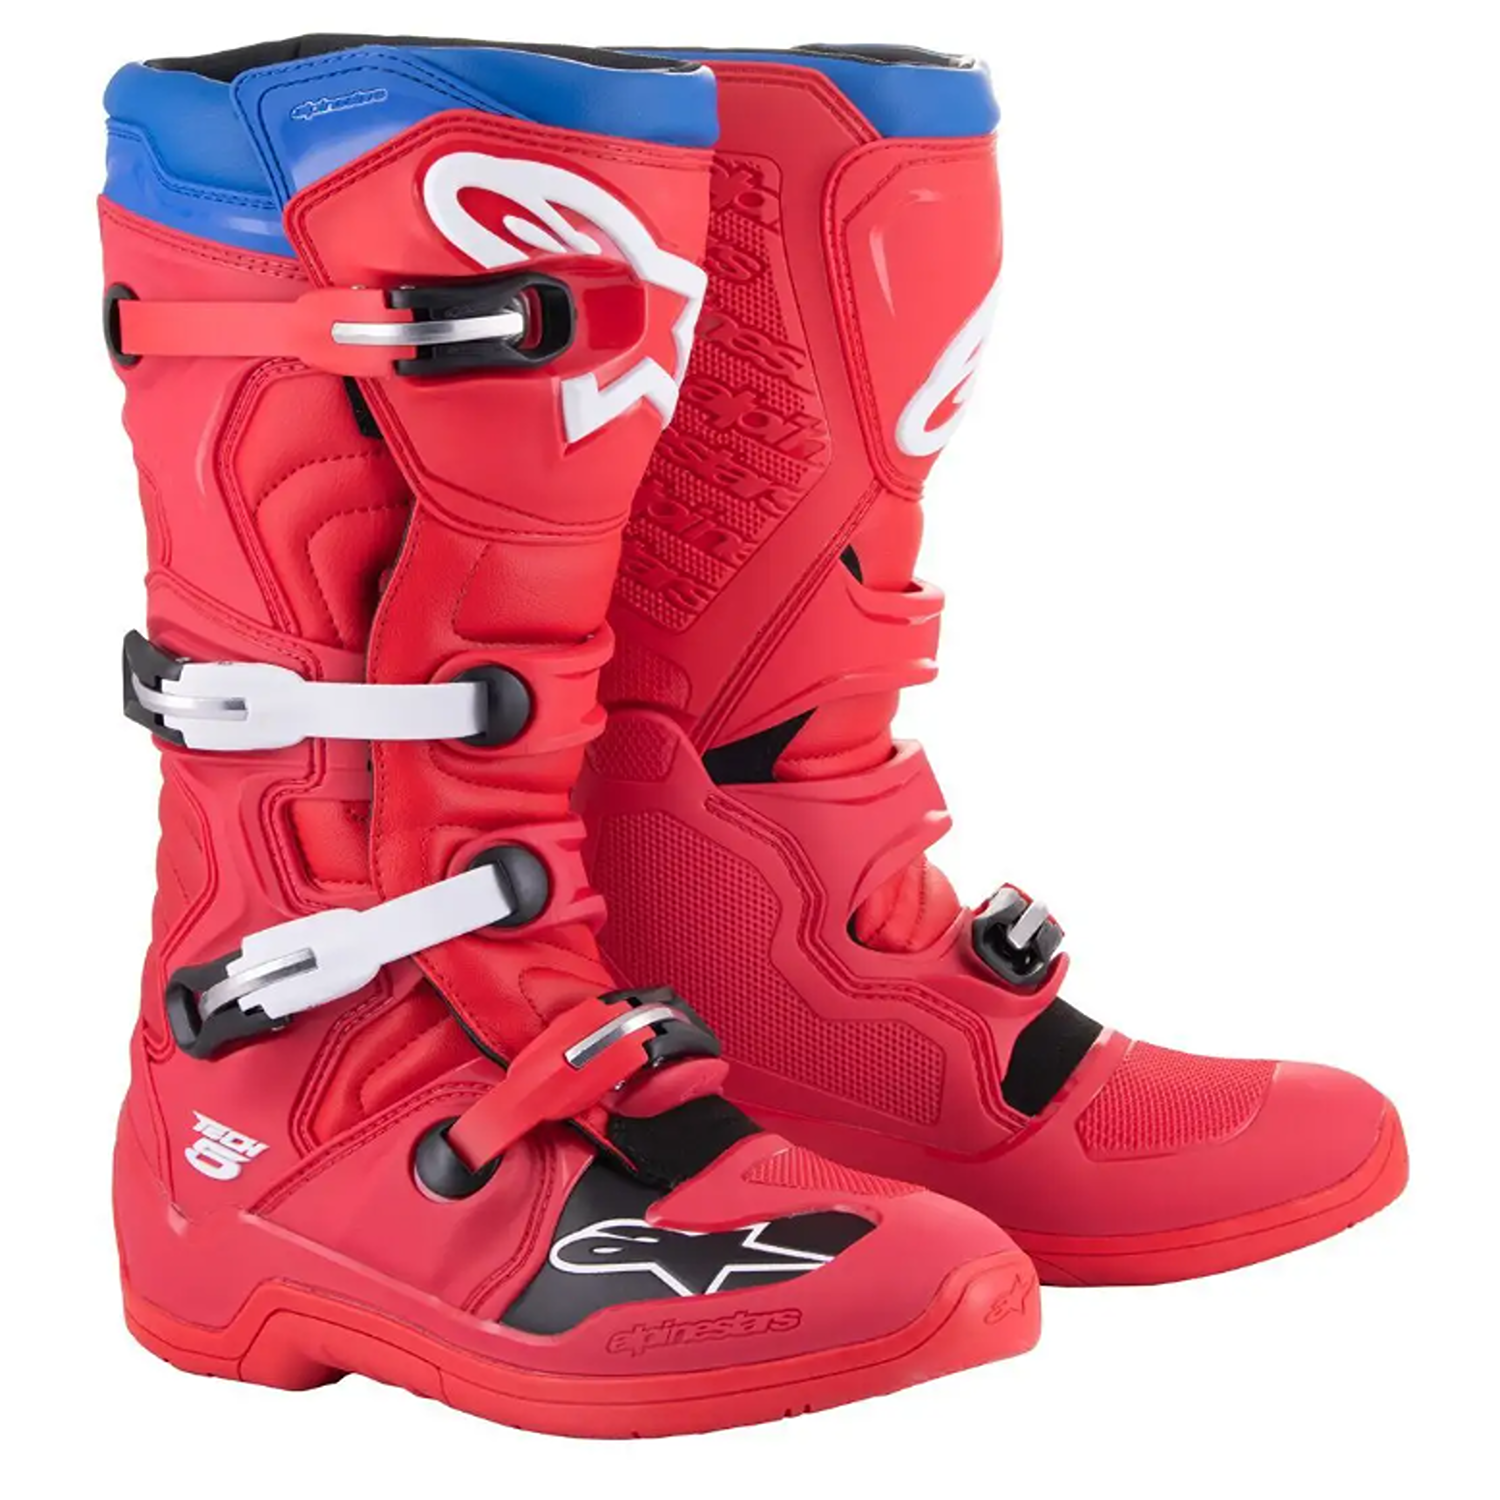 Image of Alpinestars Tech 5 Boots Bright Red Dark Red Blue Size US 12 ID 8059347199375